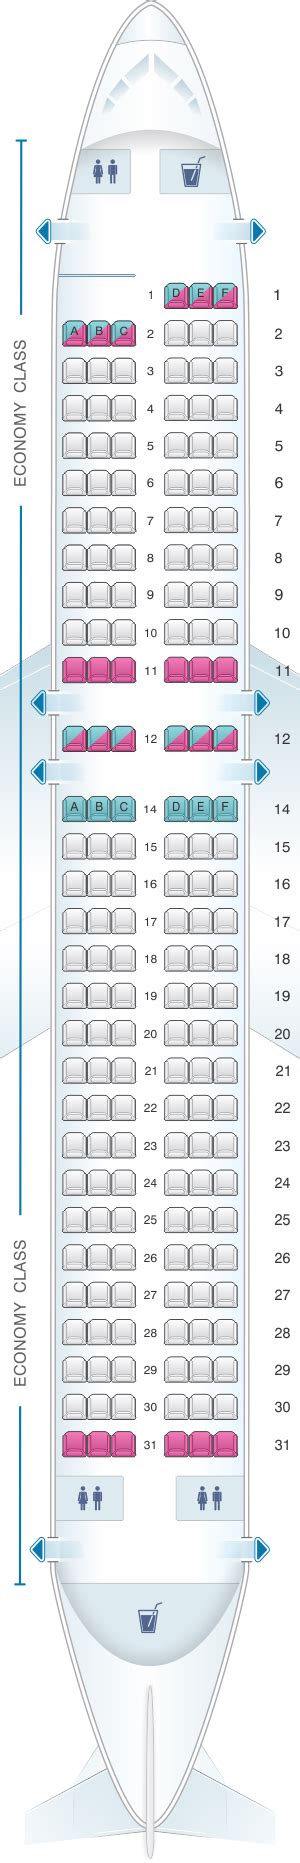 Allegiant airbus a320 seating chart. Scoot Tigerair Pte Airbus A320 aircraft seat map. The fleet of Scoot Tigerair Pte includes Airbus A320-200. The seating capacity of Scoot Airbus A320 is a typical seat plan of 180 passengers in a single-class configuration. Scoot Tigerair Pte often employs the Airbus A320 for short to medium-haul flights due to its fuel efficiency, which can ... 